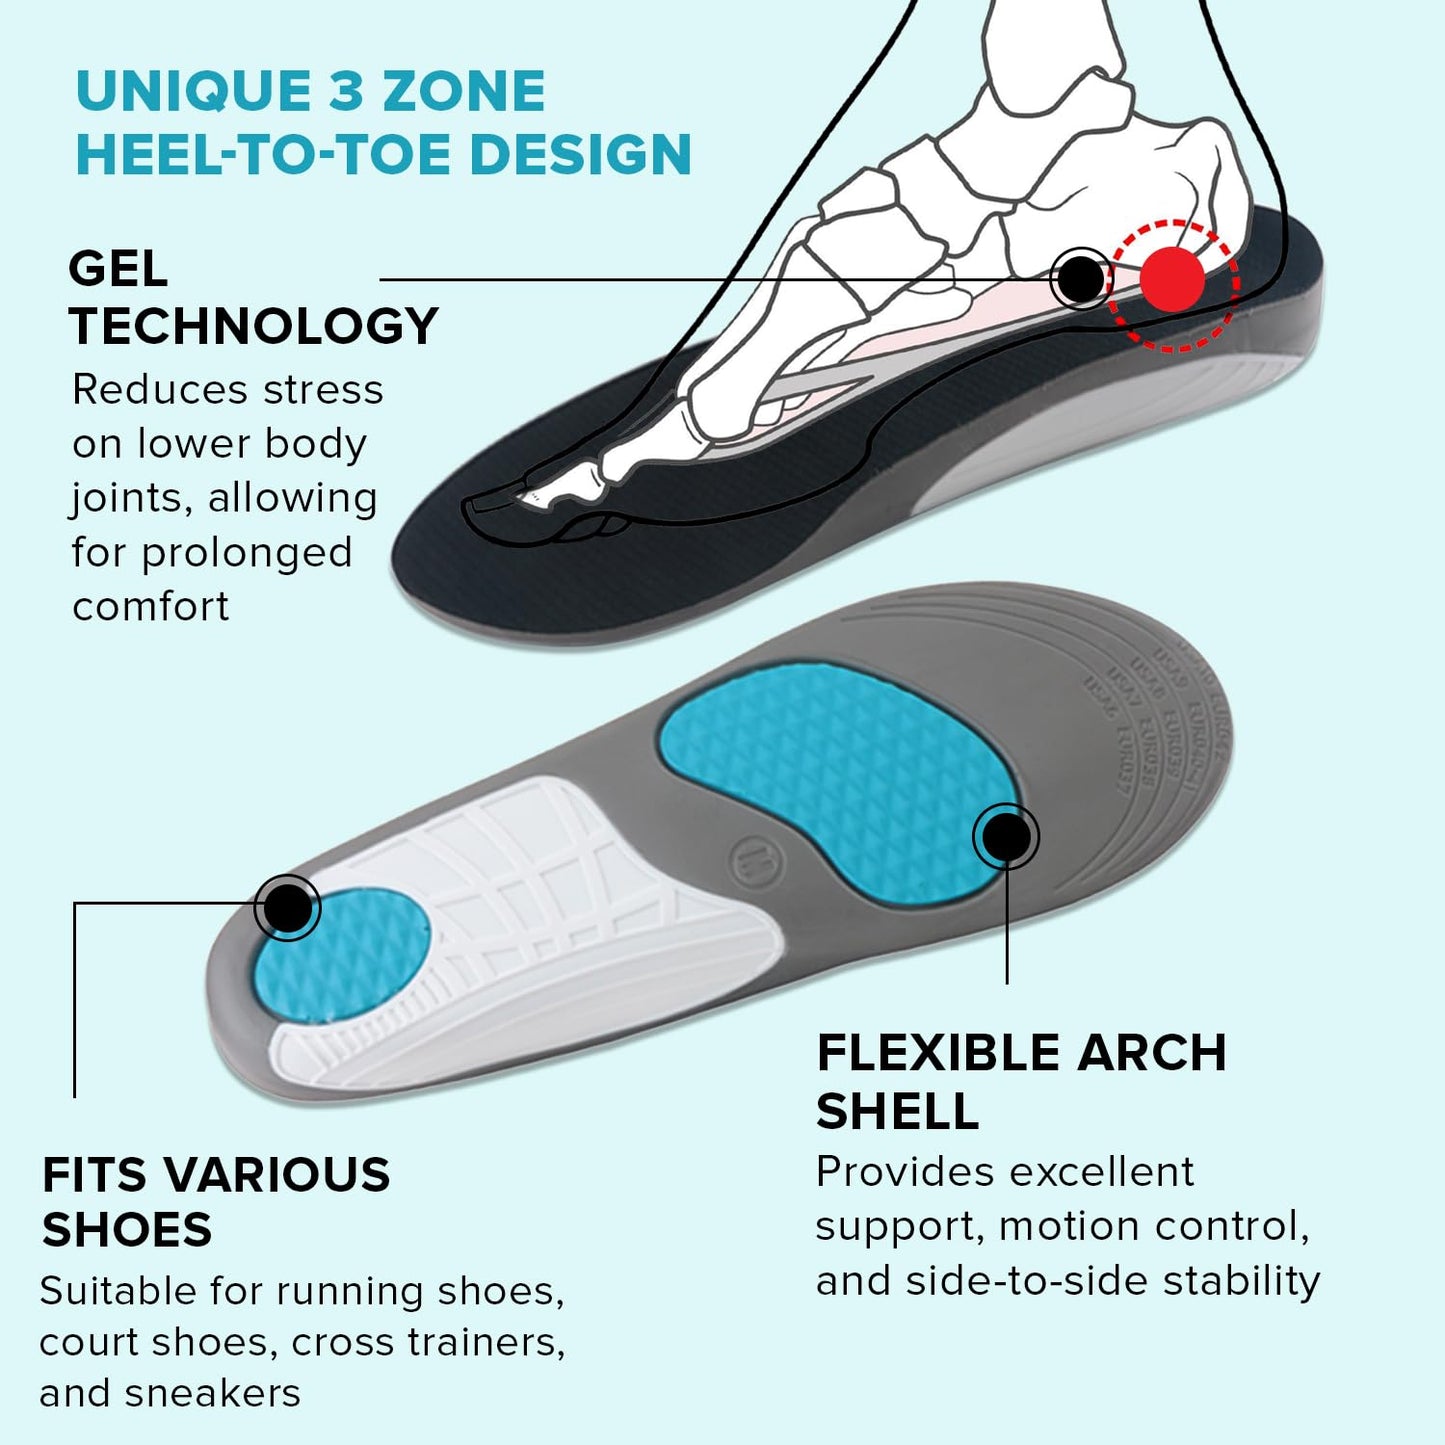 Dr Foot Sport Insole  Support Shock Absorption Cushioning Sports  Enhance Performance and Comfort for Running Hiking Working  Fits Running Shoes  For Men  Women - 1 Pair Large Size